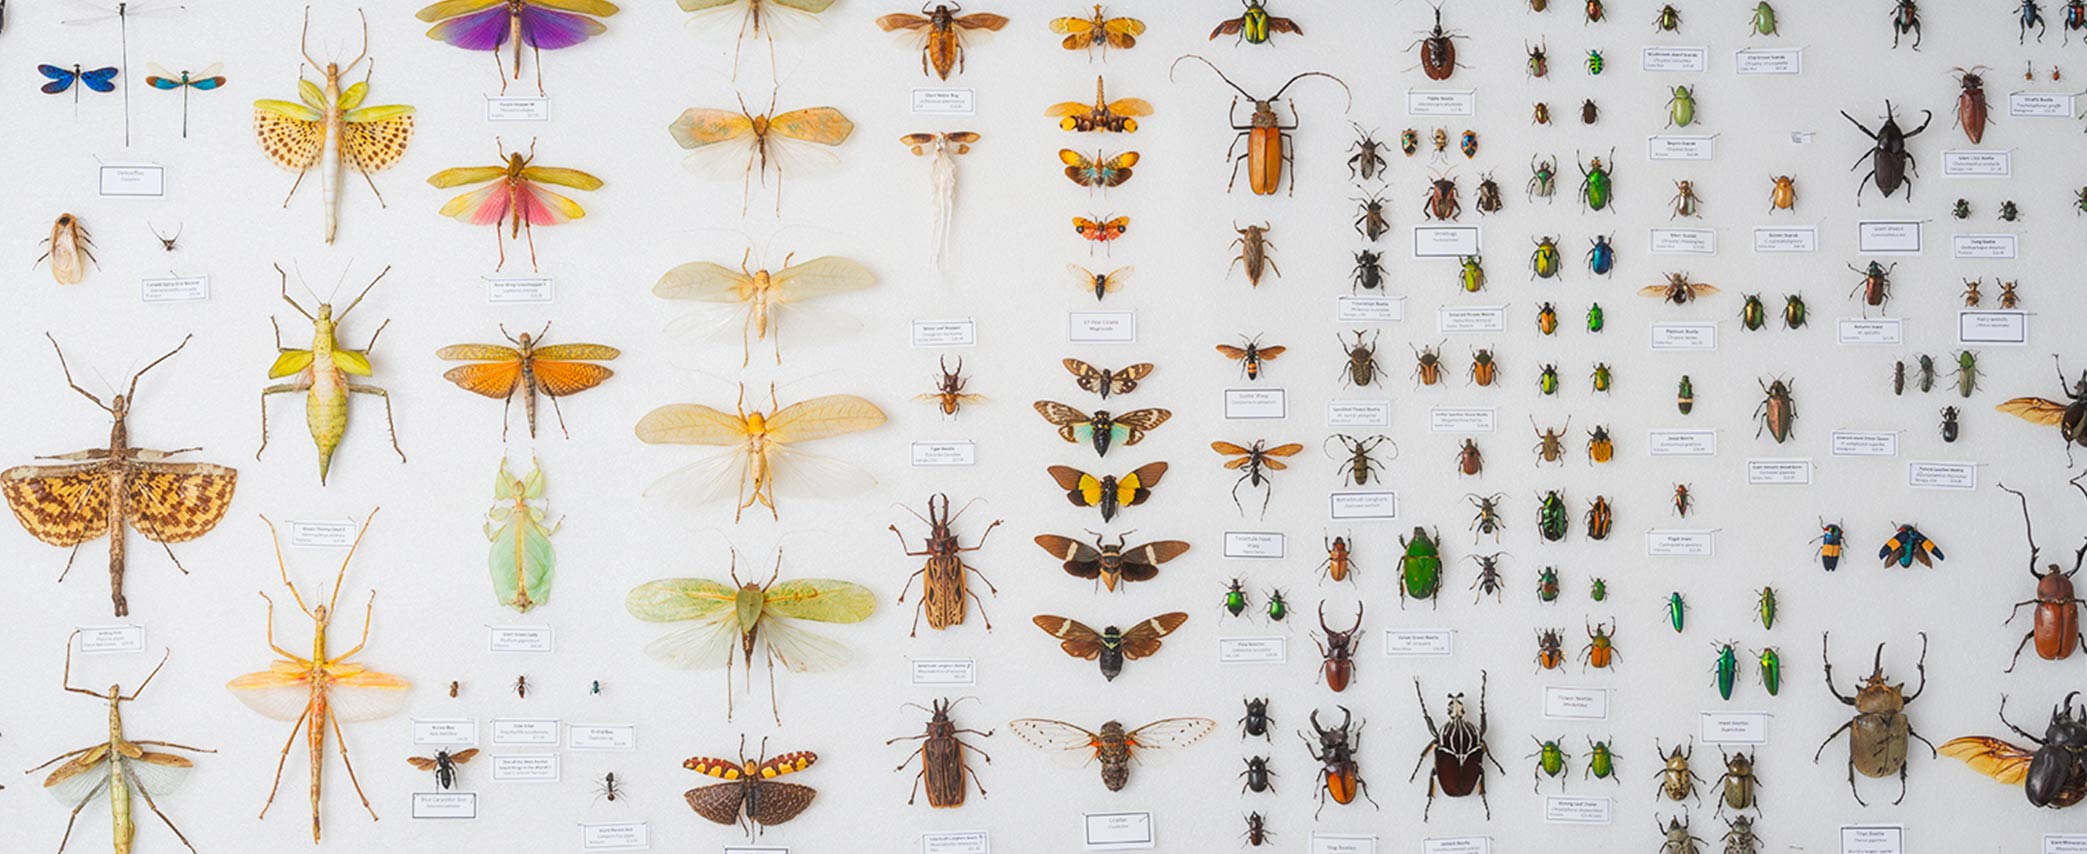 Beetle Collection: Goliath Beetles from Africa